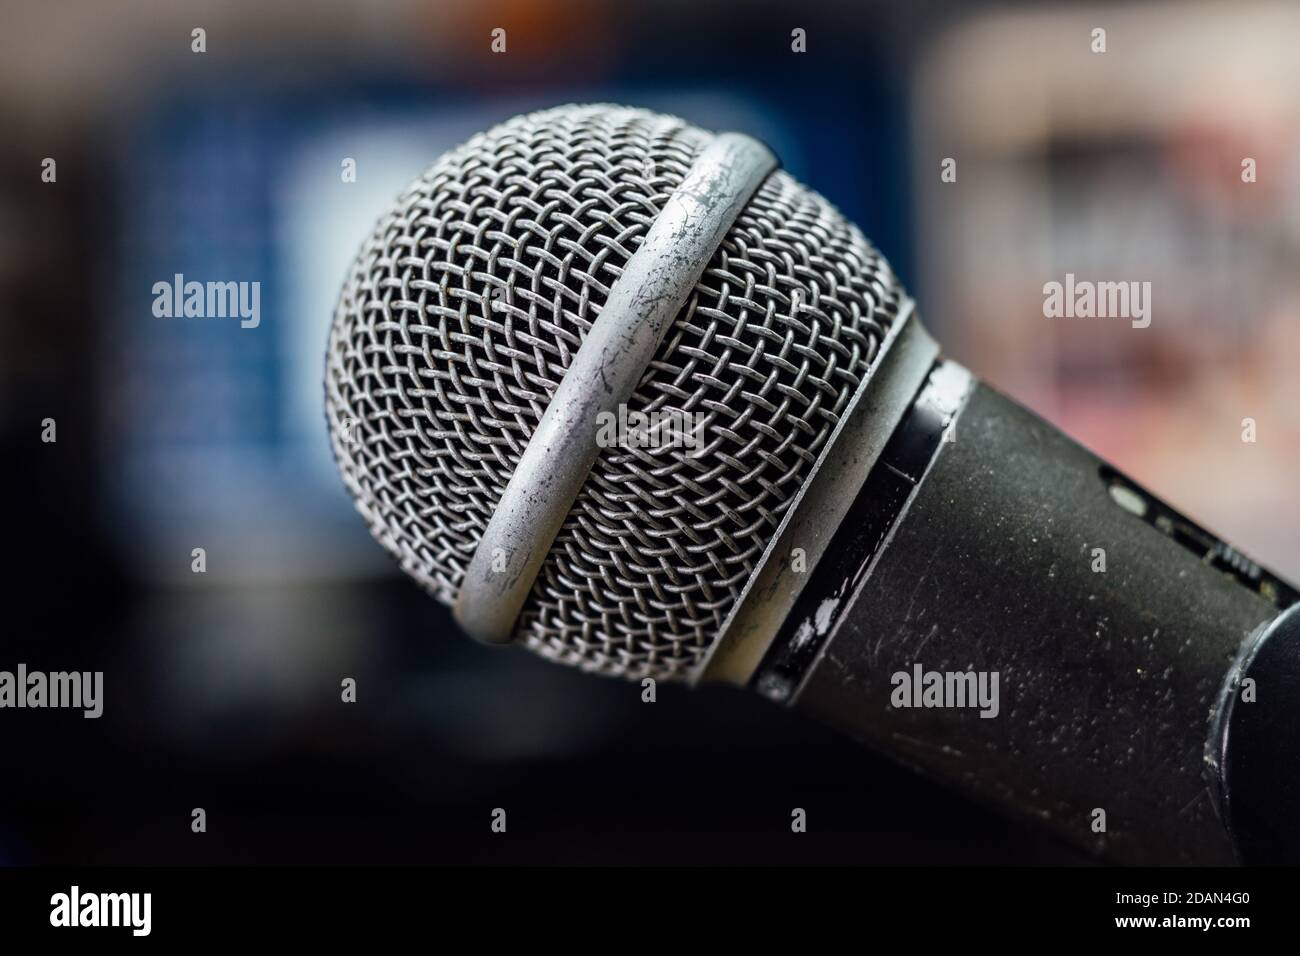 Old, scratched and used microphone on a stand. Blurred background, close up. Stock Photo